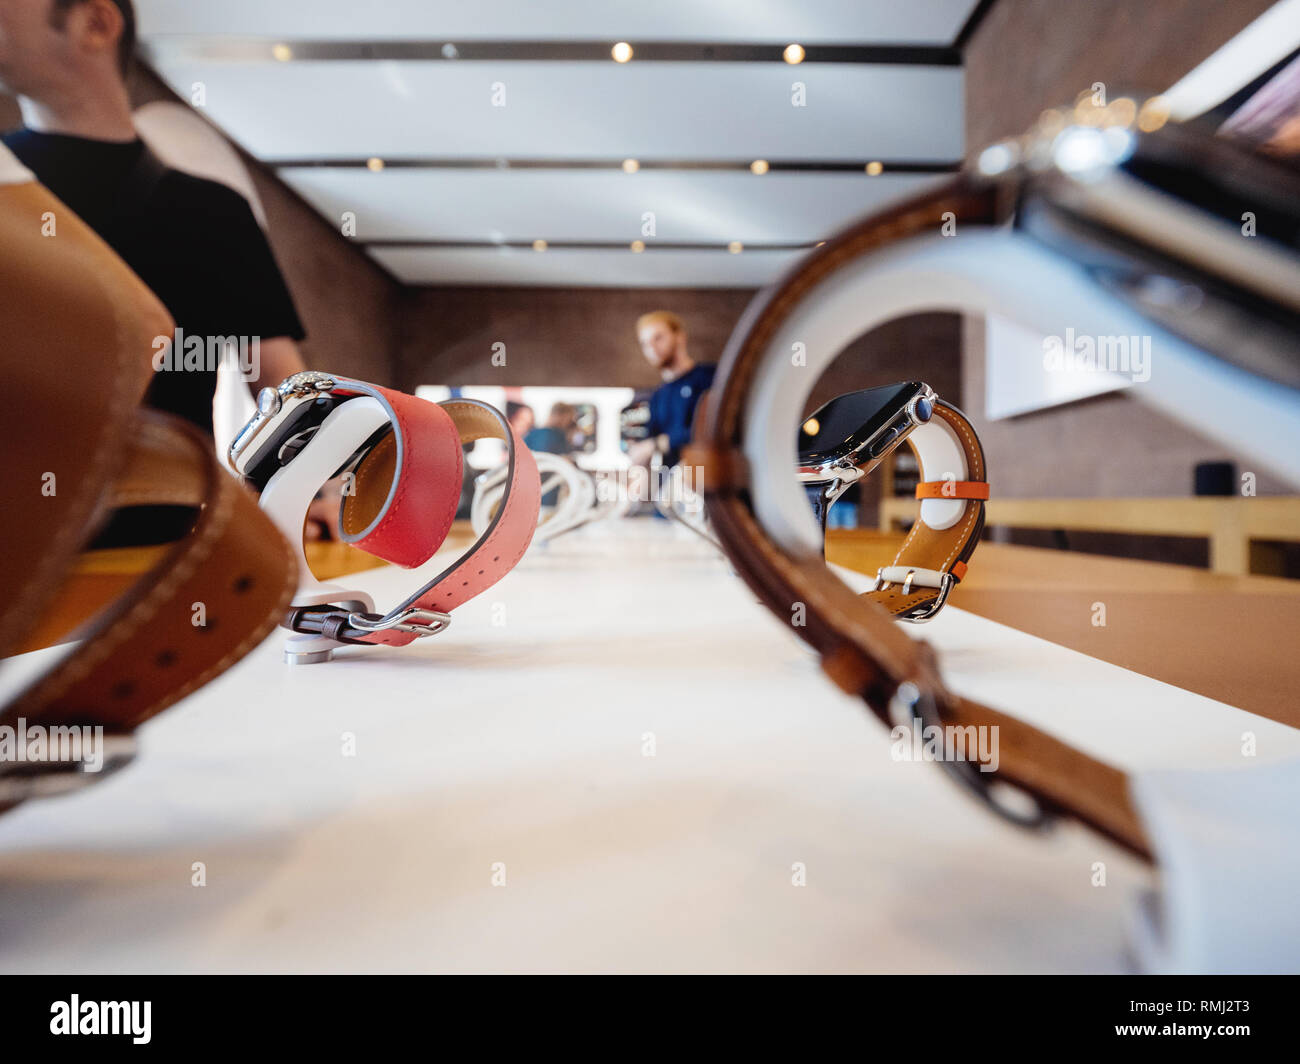 STRASBOURG, FRANCE - SEP 21, 2018: Apple Store with customers admiring the new latest Watch Series 4 wearable devices with diverse straps view through the watches wide angle Stock Photo